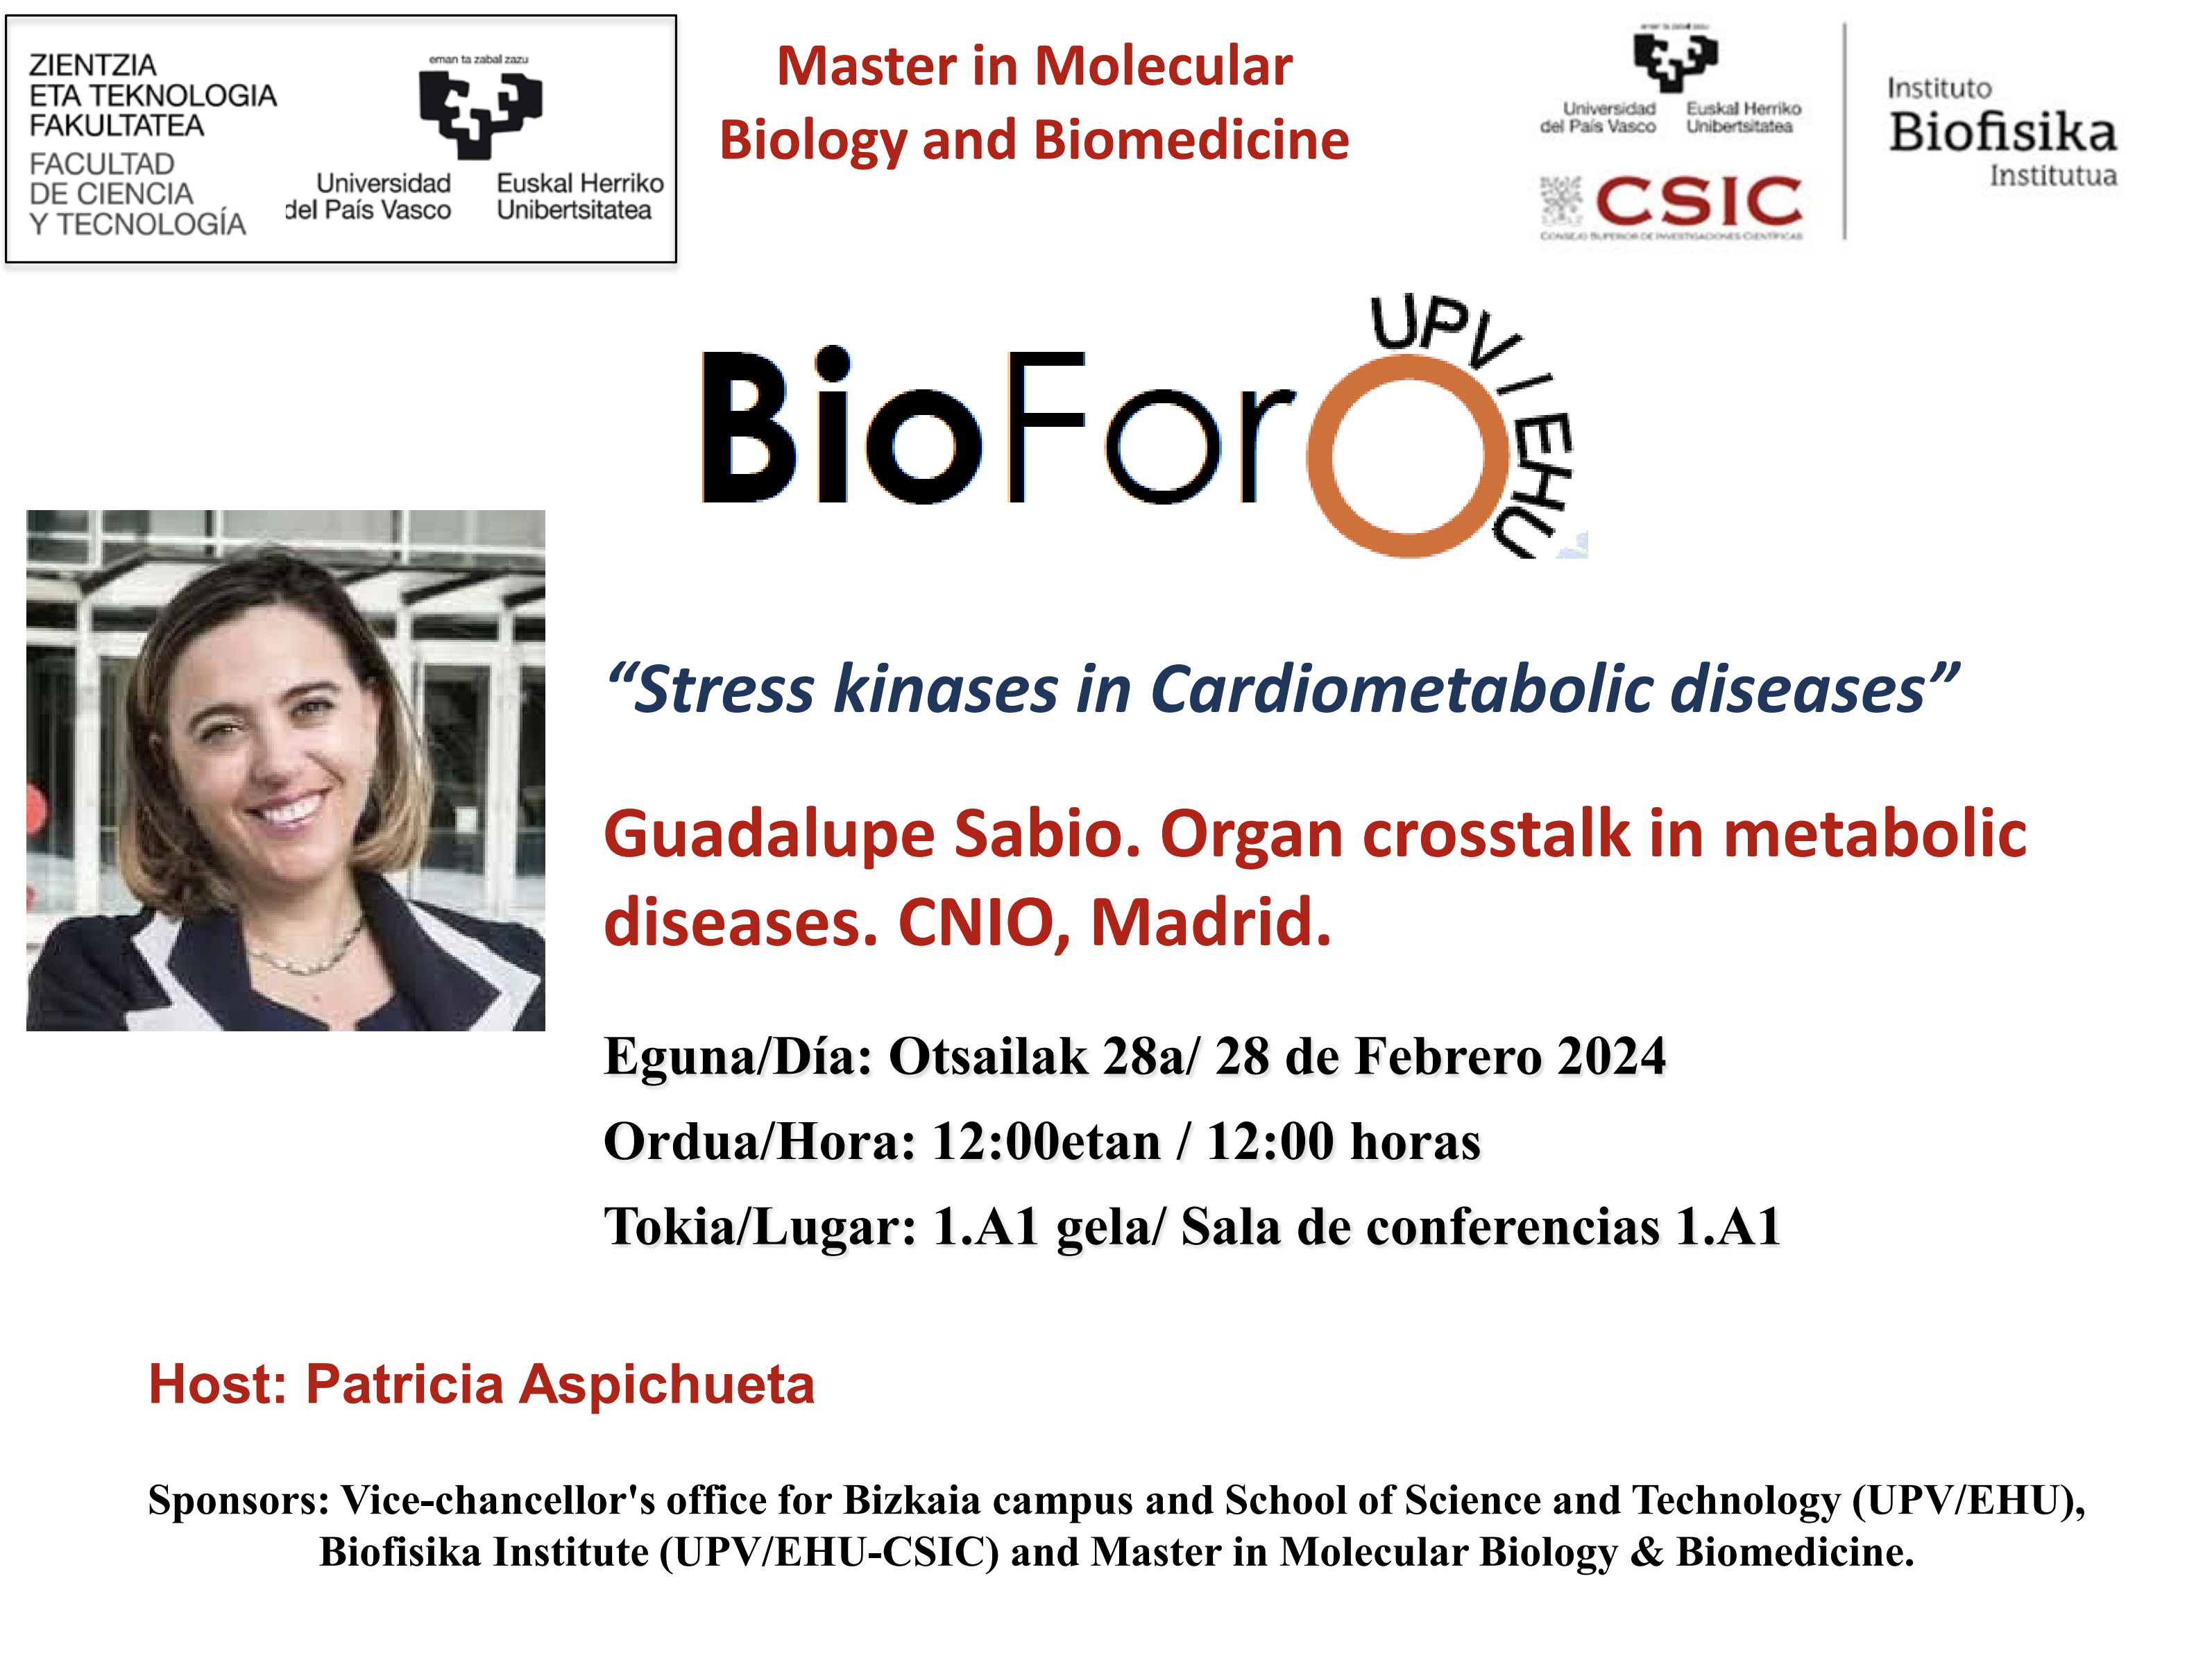 BioForo Seminar: “Impact of chromatin remodeling defects in cellular plasticity, lung cancer progression and treatment sensitivity”